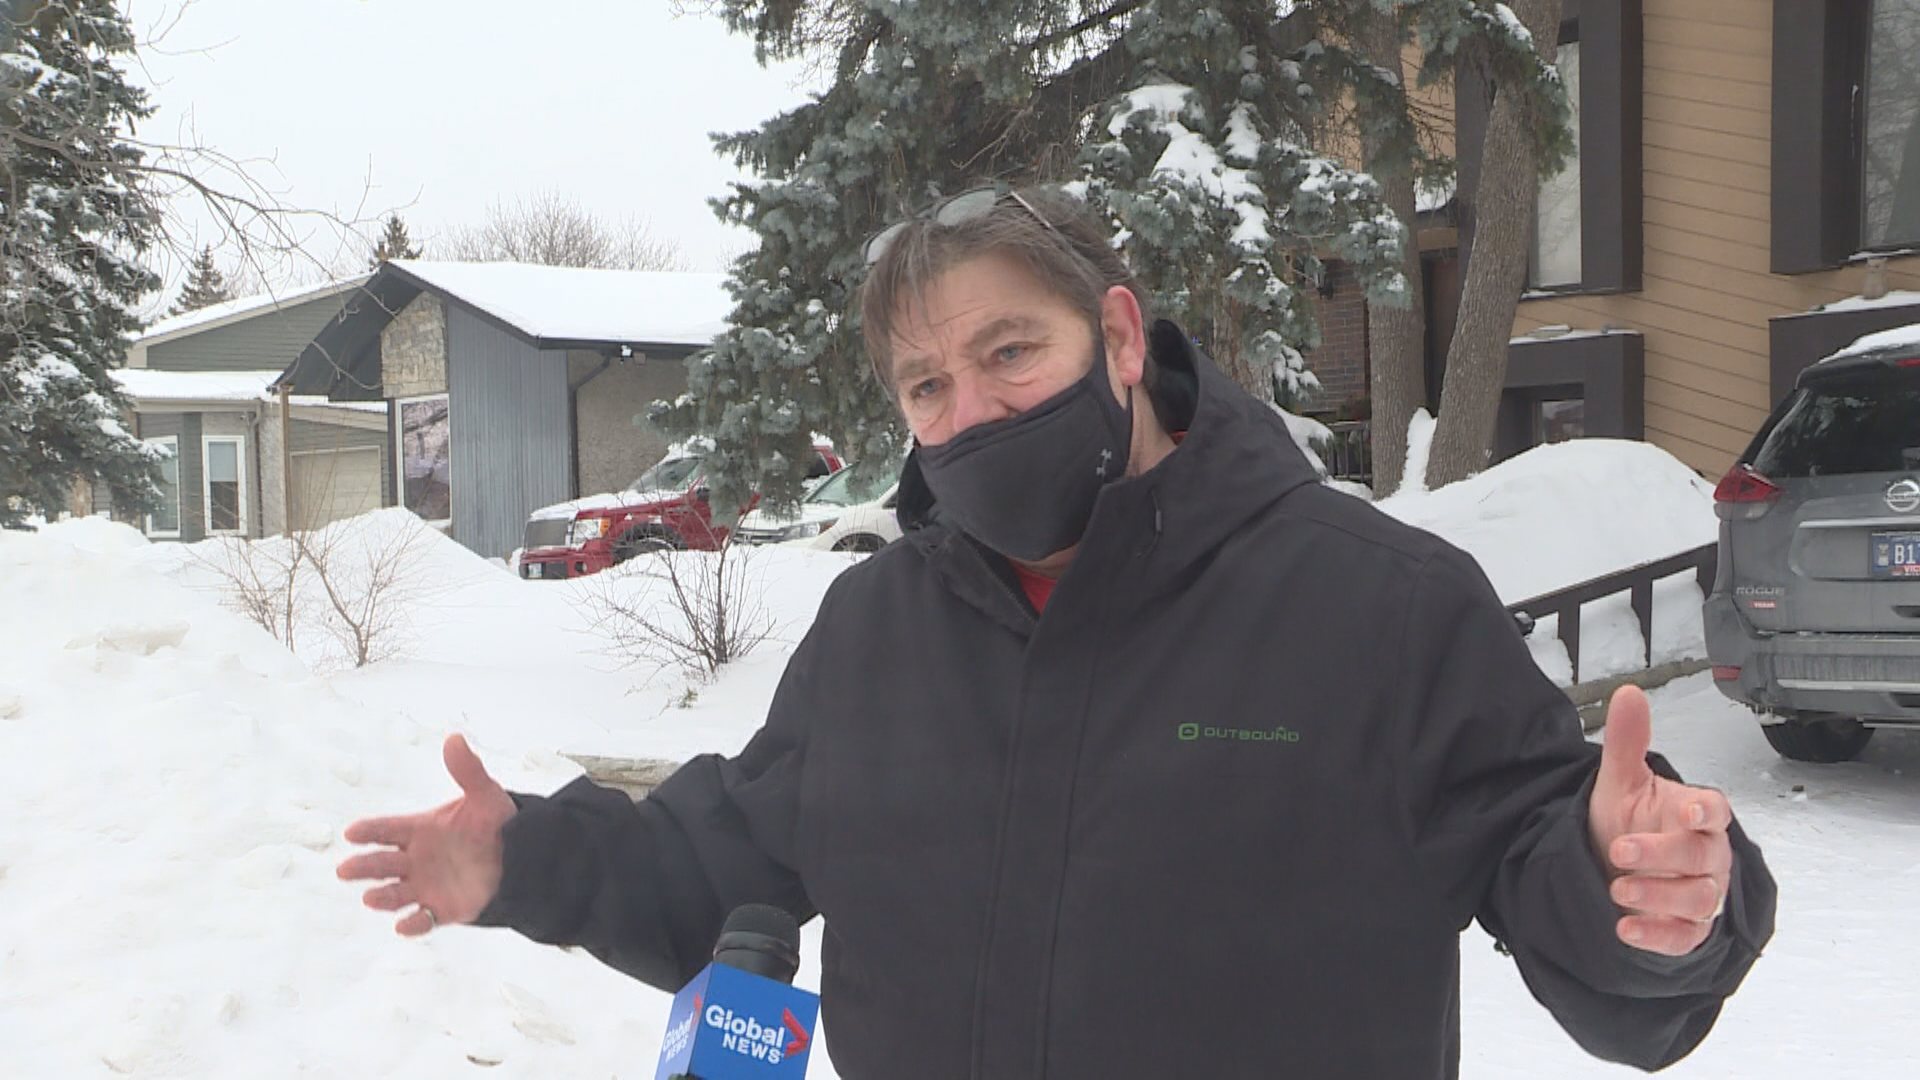 Ed Buell says it was “difficult” dealing with Winnipeg’s 311 service as he sought to have a snow pile removed from the end of his driveway.